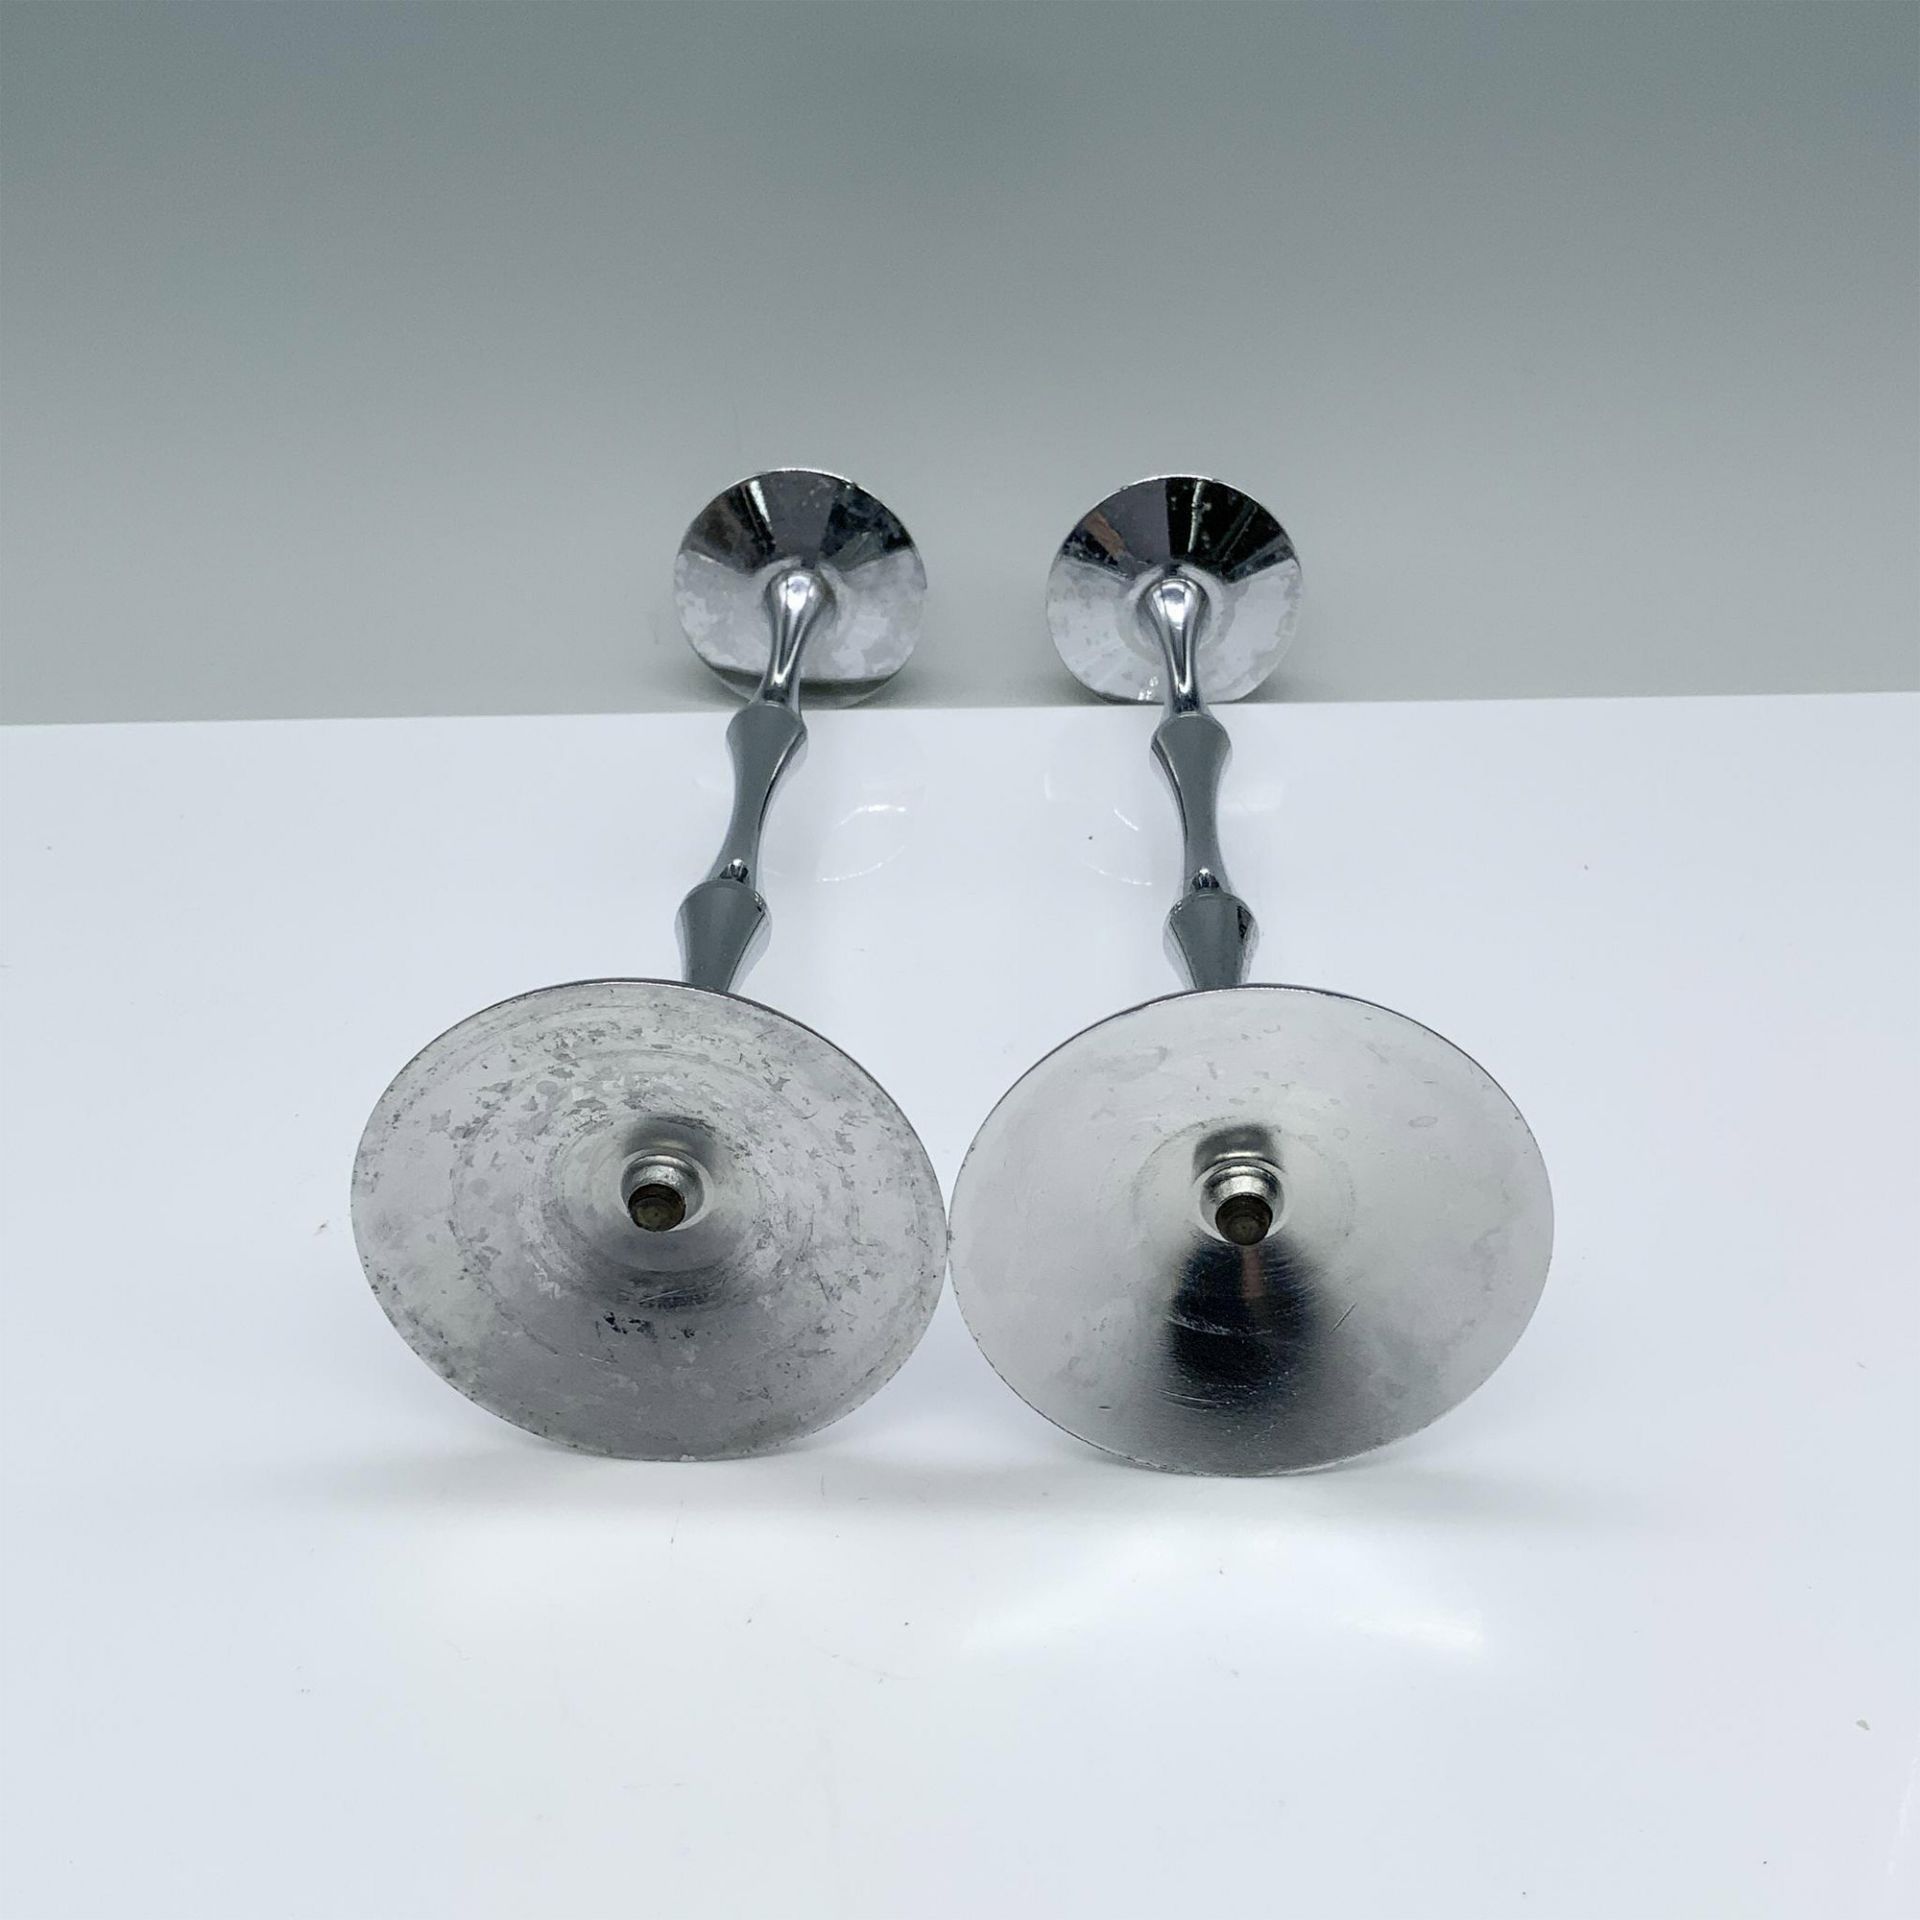 Pair of Vintage English Silver Metal Candlestick Holders - Image 2 of 4